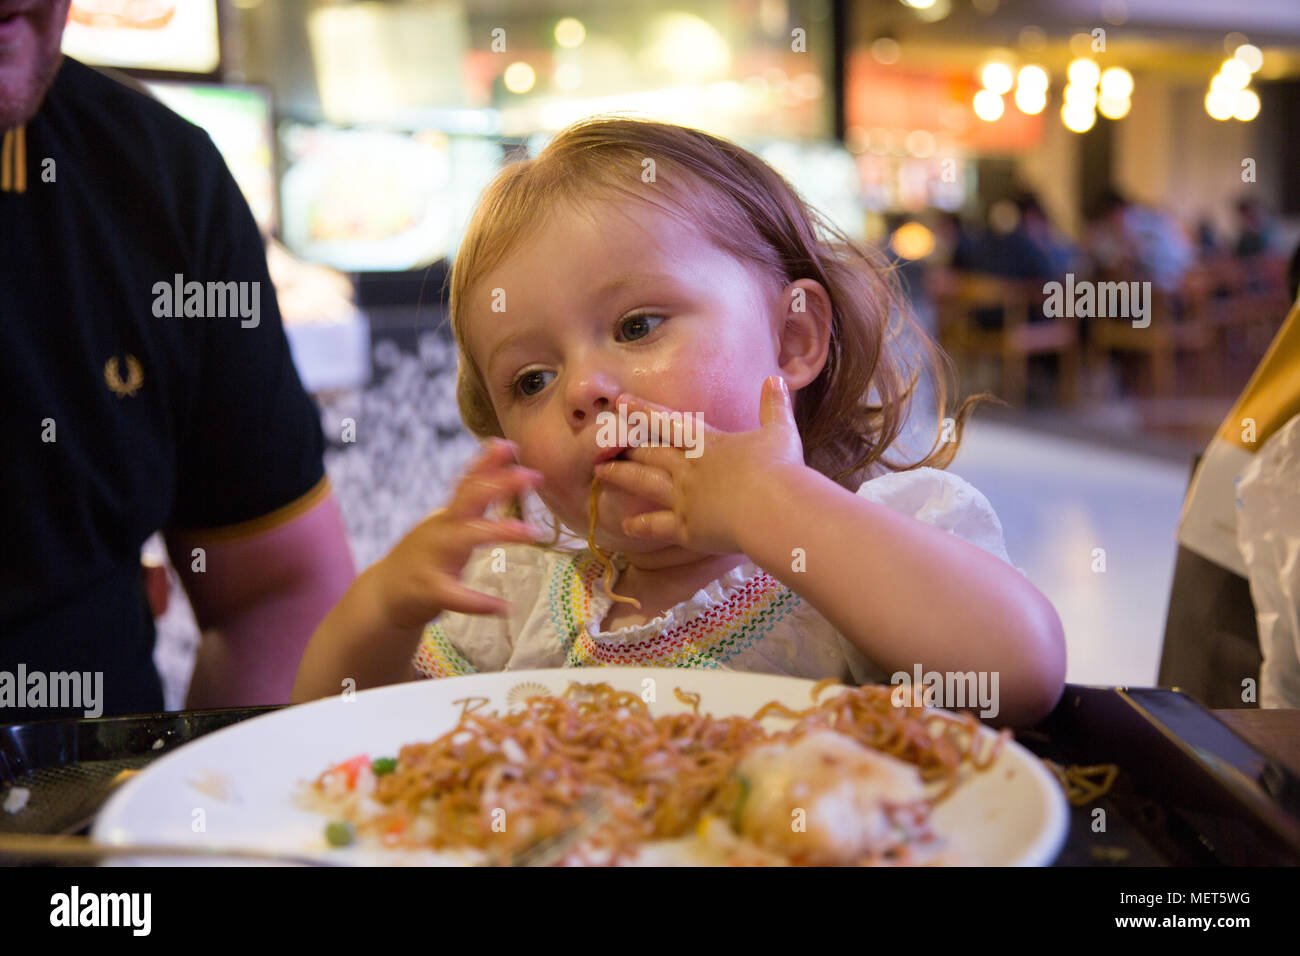 15 month old eating noodles Stock Photo